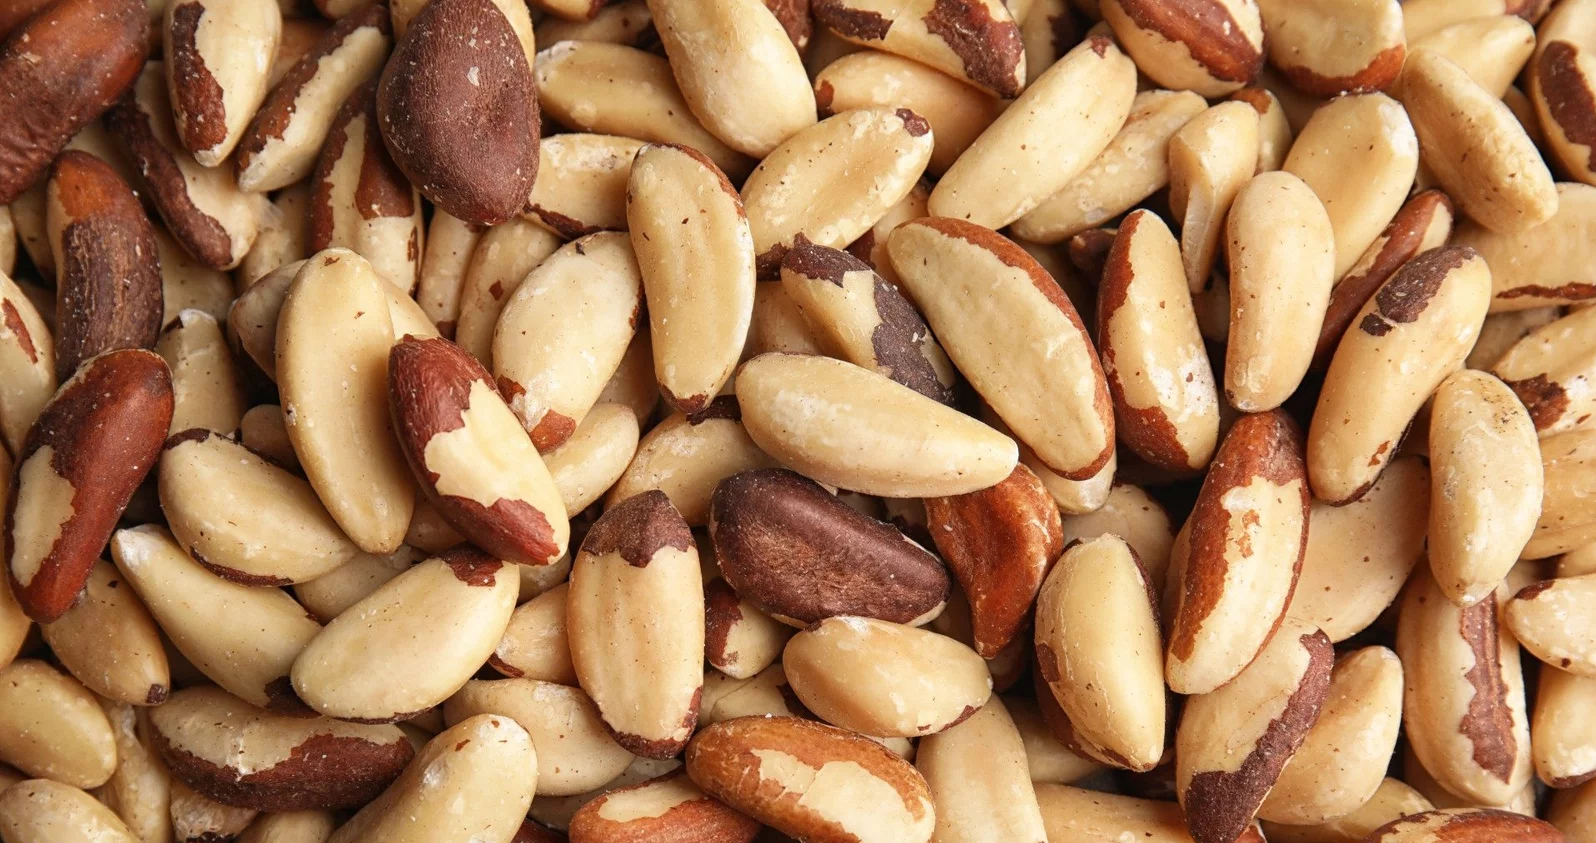 Brazil Nuts: The Superfood for Heart Health and Cholesterol Control